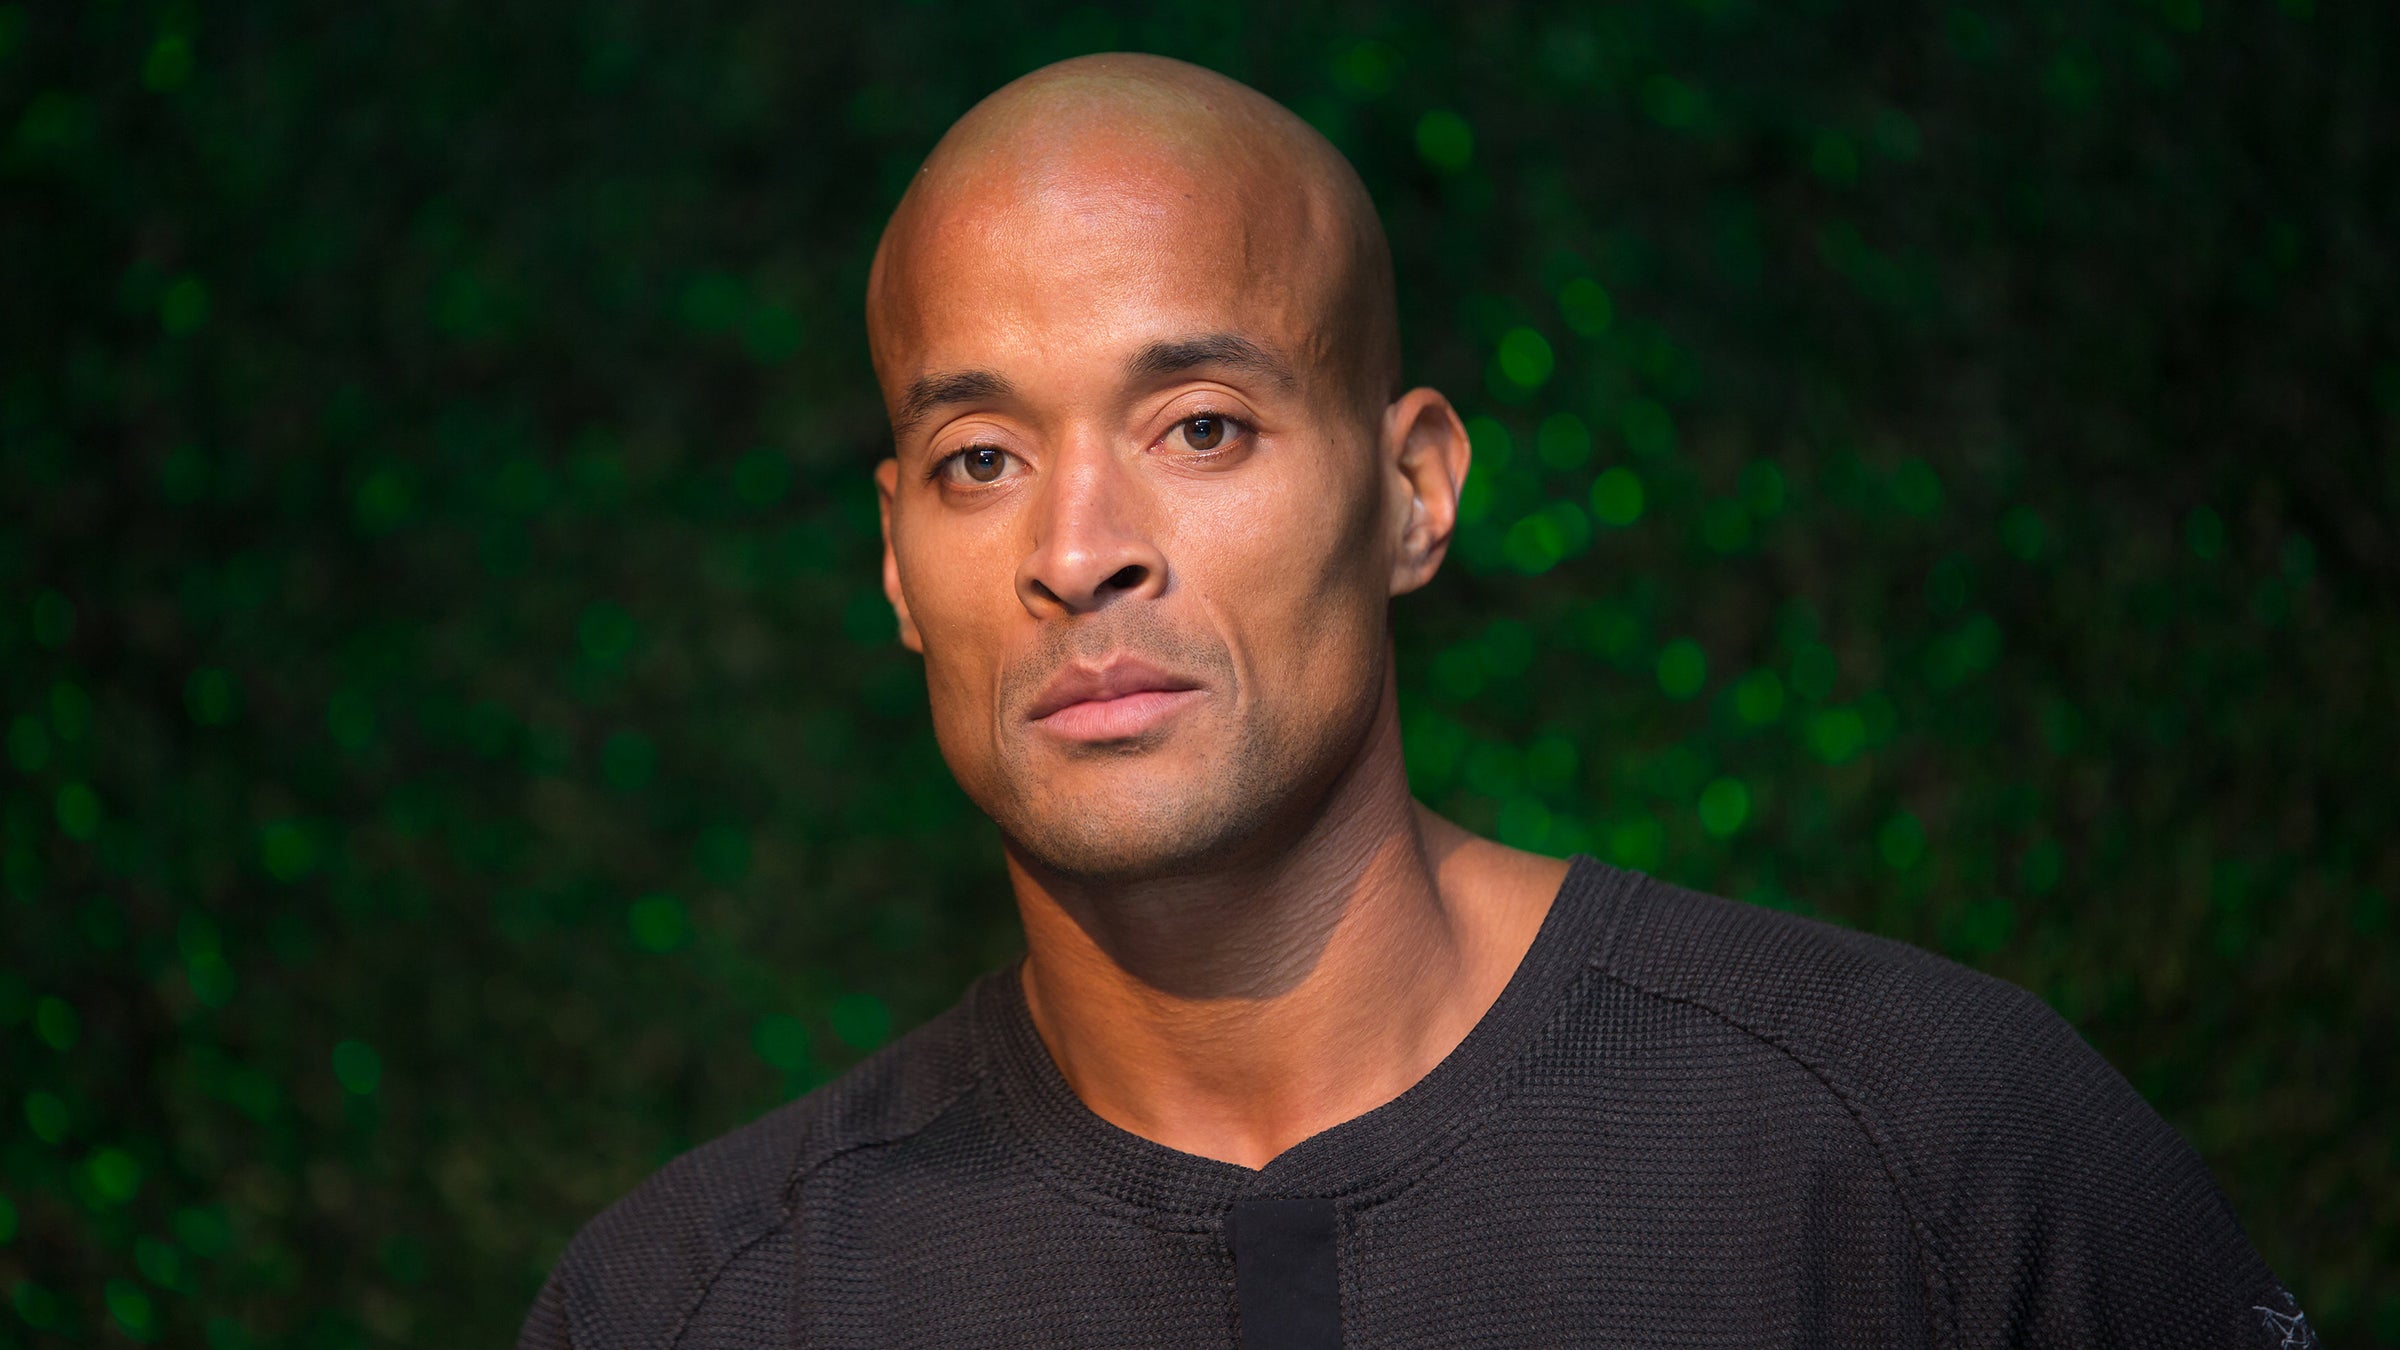 David Goggins: Proof That Anything is Possible - One Percent Daily